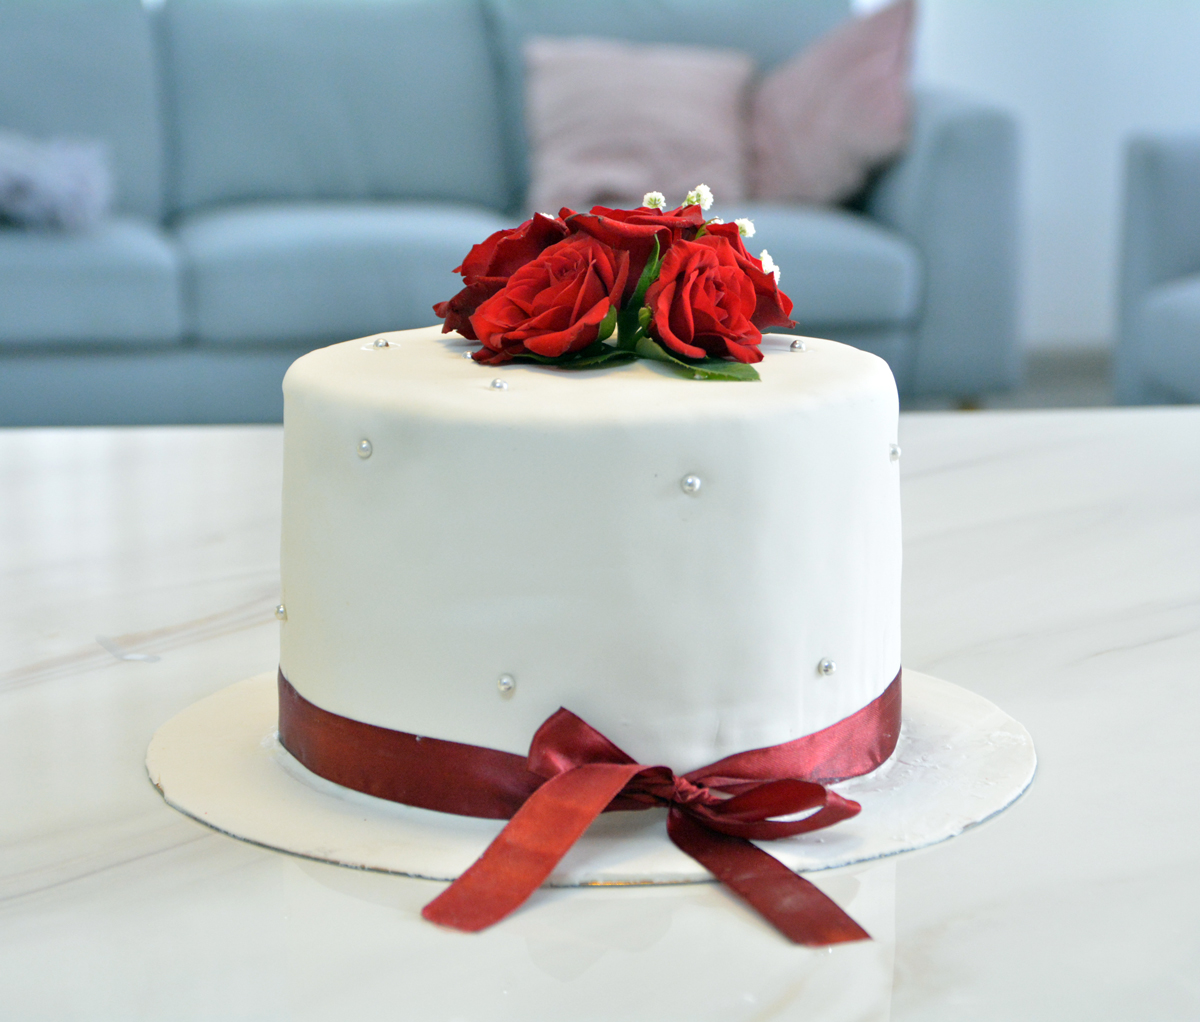 Sugarpaste cake with natural flowers